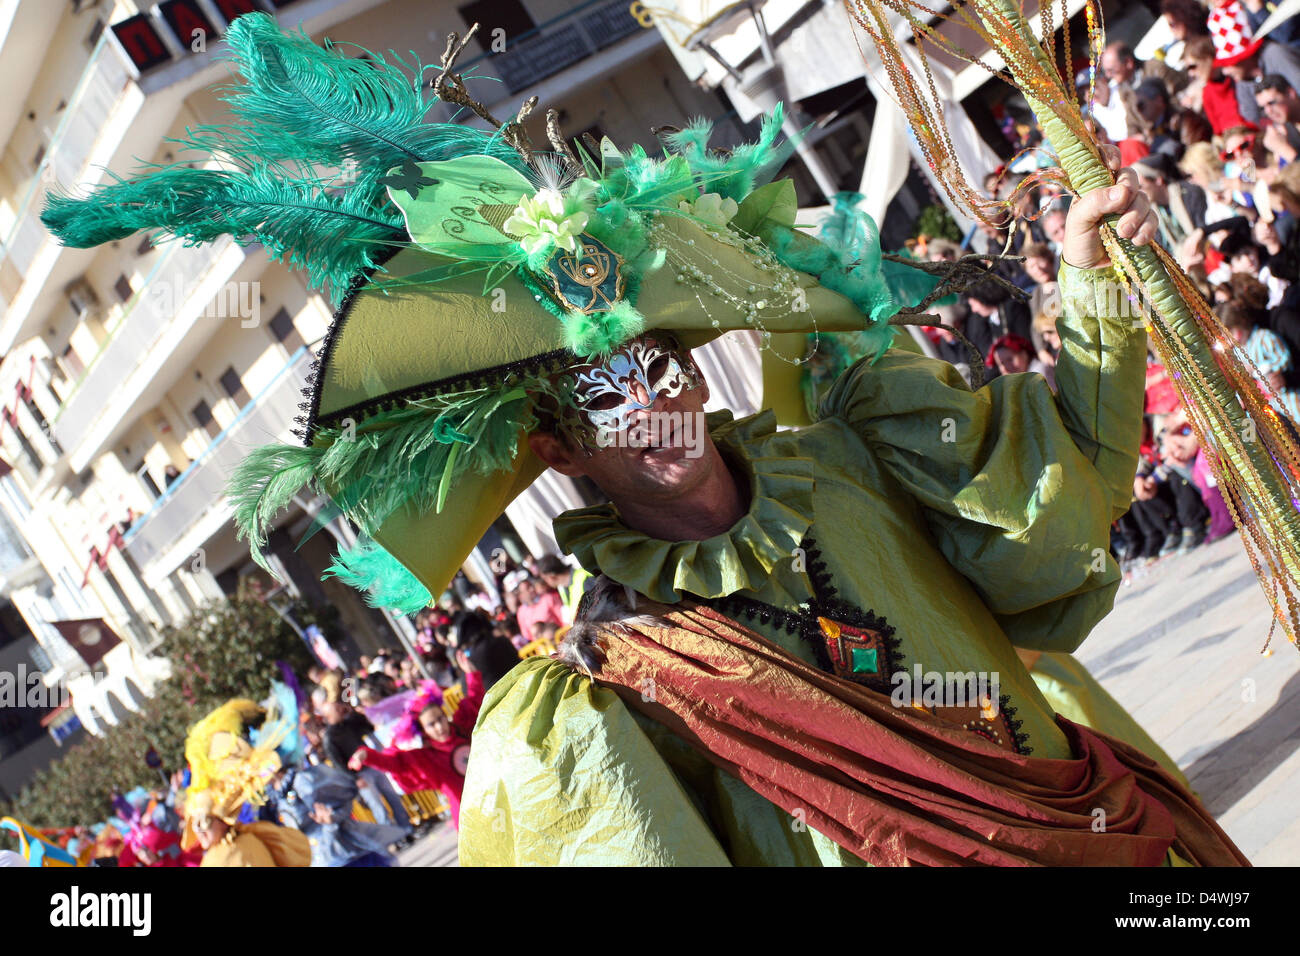 Patras, Greece. 17th March 2013. Revellers dance in colorful costumes at Carnival in  Patras, in Greece, 17 March 2013. The Patras Carnival is the biggest event of its kind in Greece and one of the biggest in Europe. Photo: Menelaos Michalatos/dpa/Alamy Live News Stock Photo